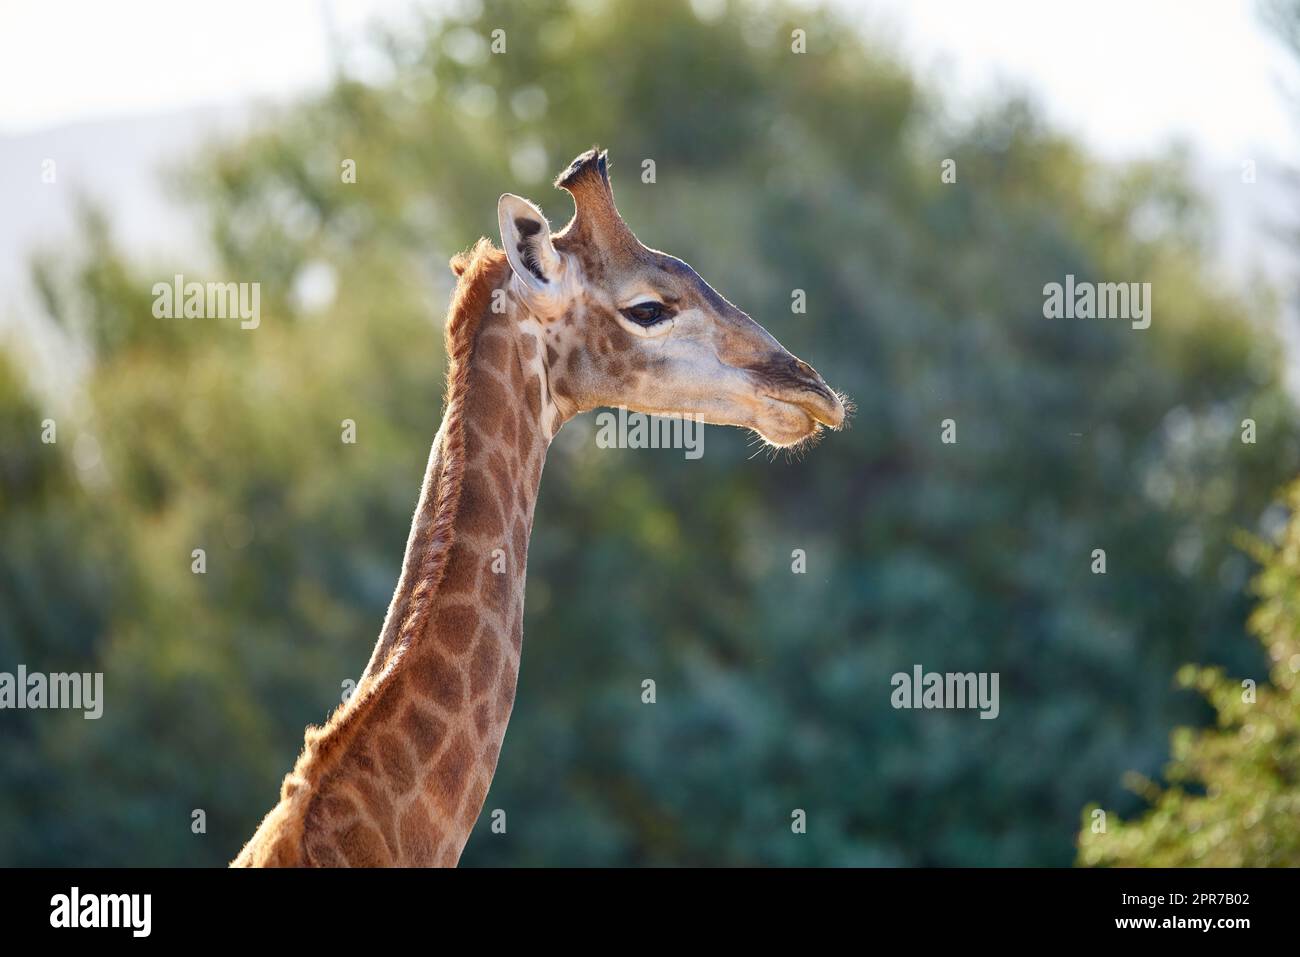 A giraffe in the wild on safari during a hot summer day. Protected wildlife in a conservation national park with wild animals in Africa. A single long neck mammal in the savannah region Stock Photo